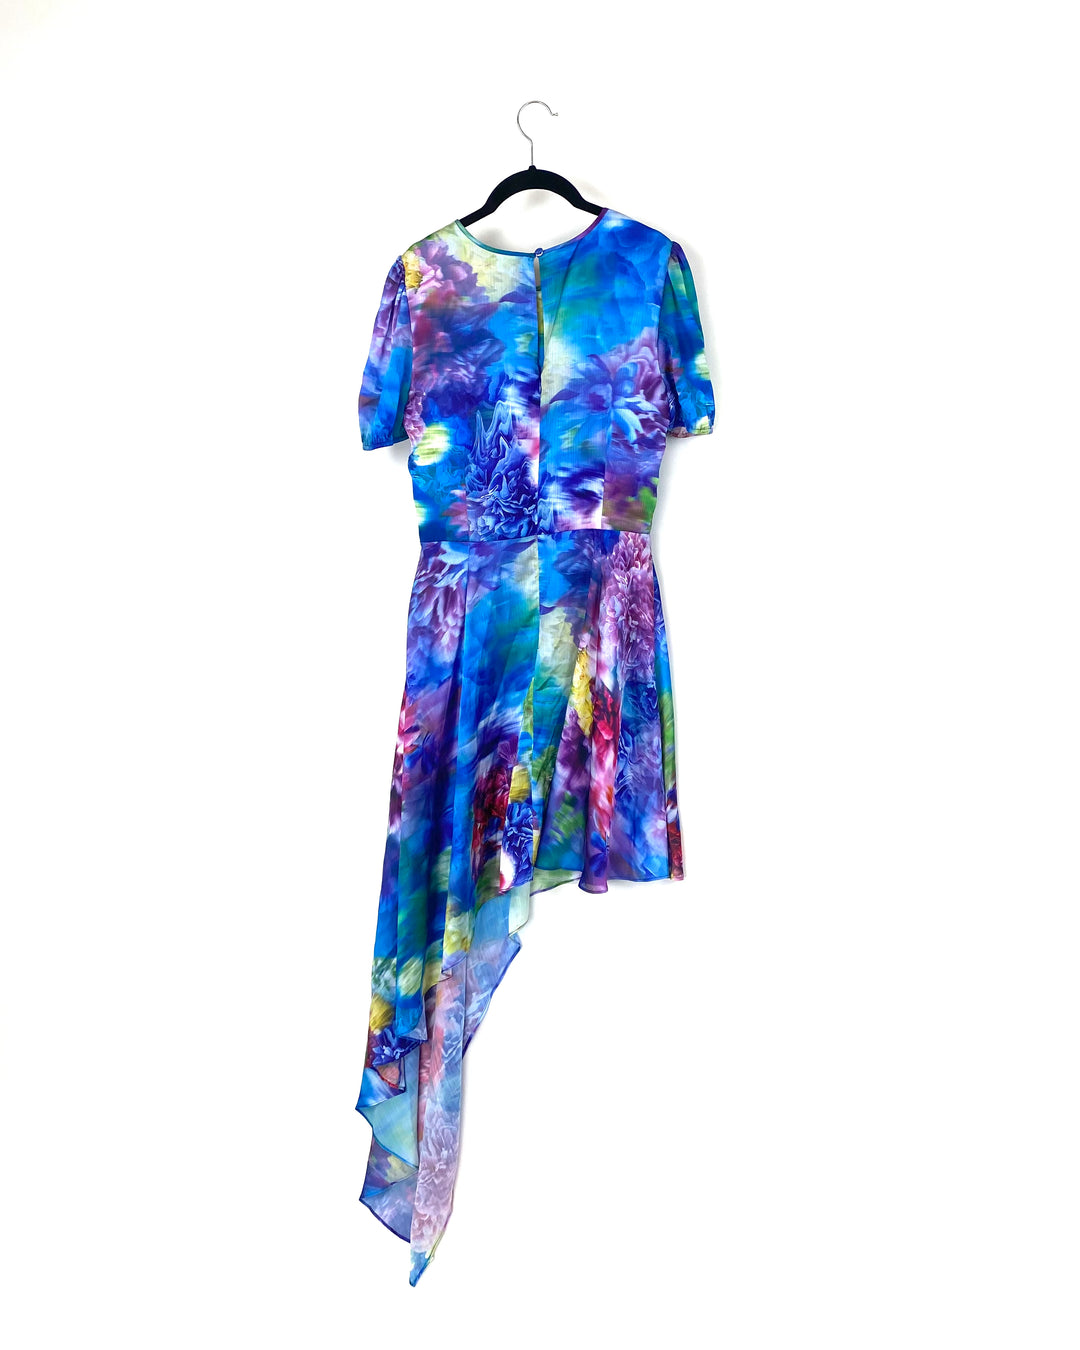 Colorful Floral Asymmetrical Dress - Small